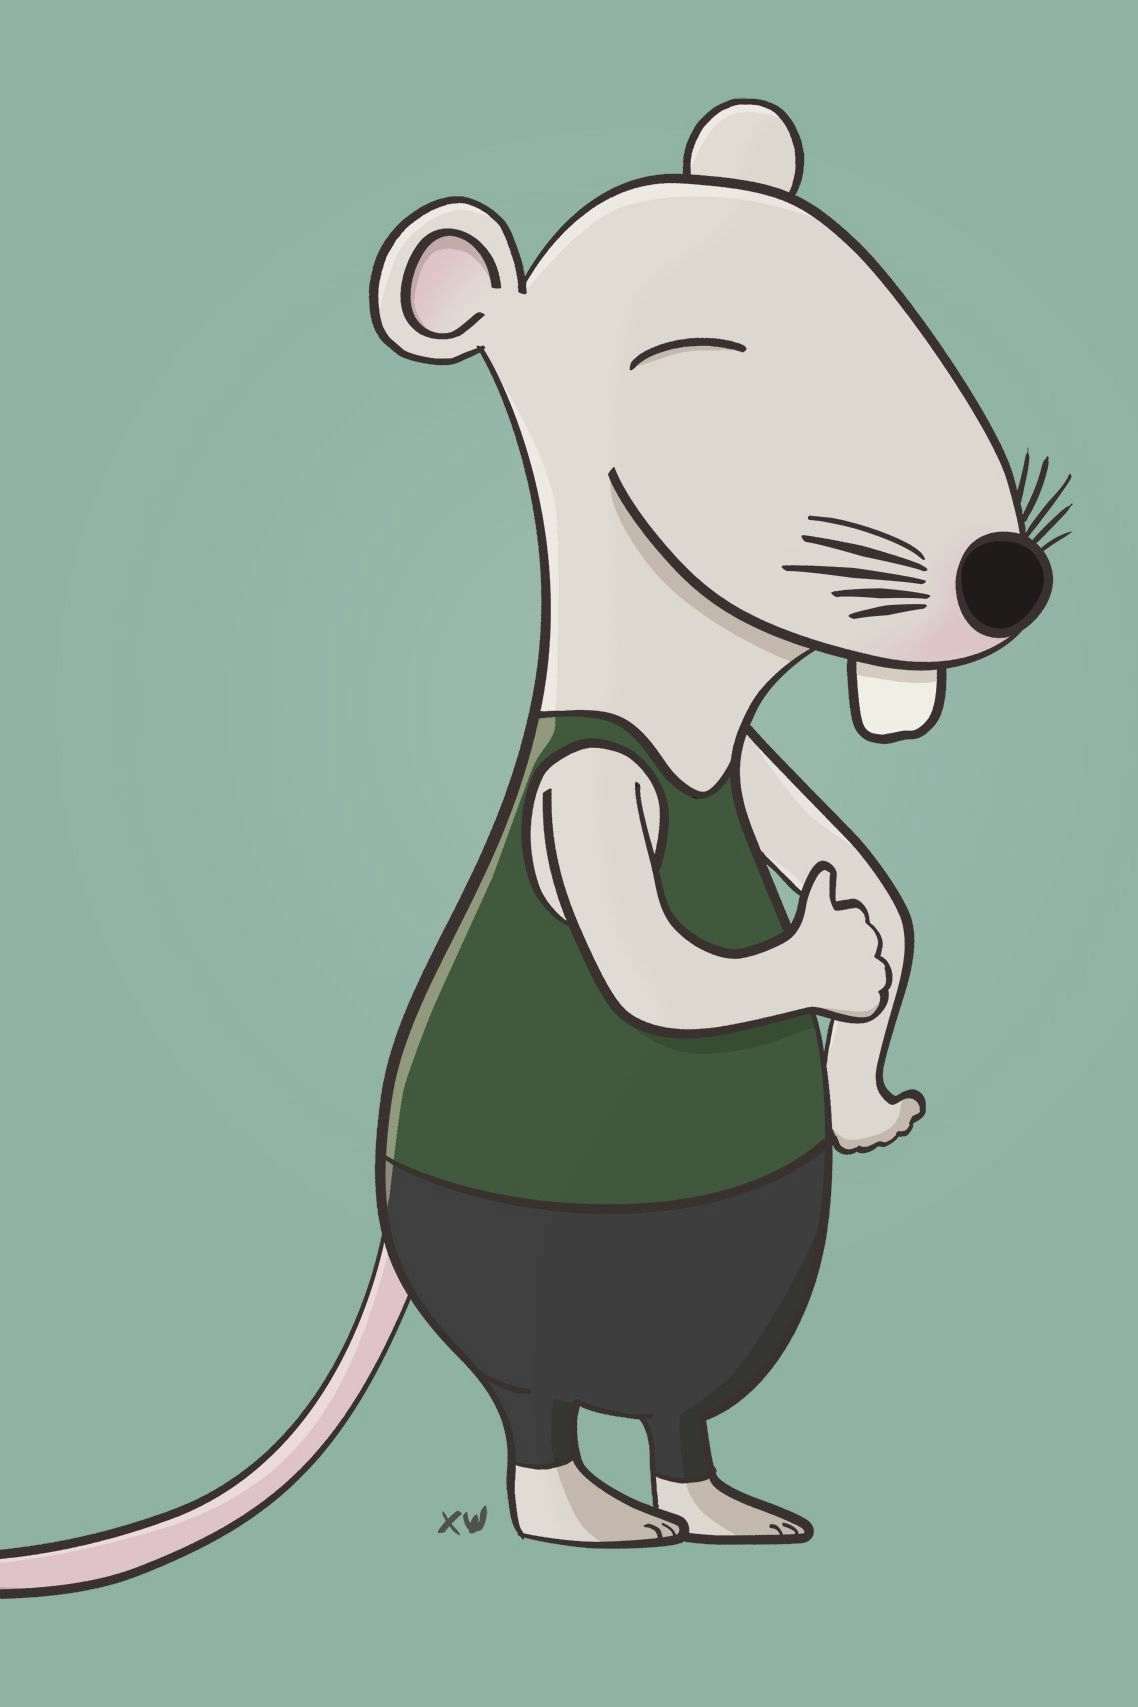 Funny cartoon rat character by Xavier Wendling